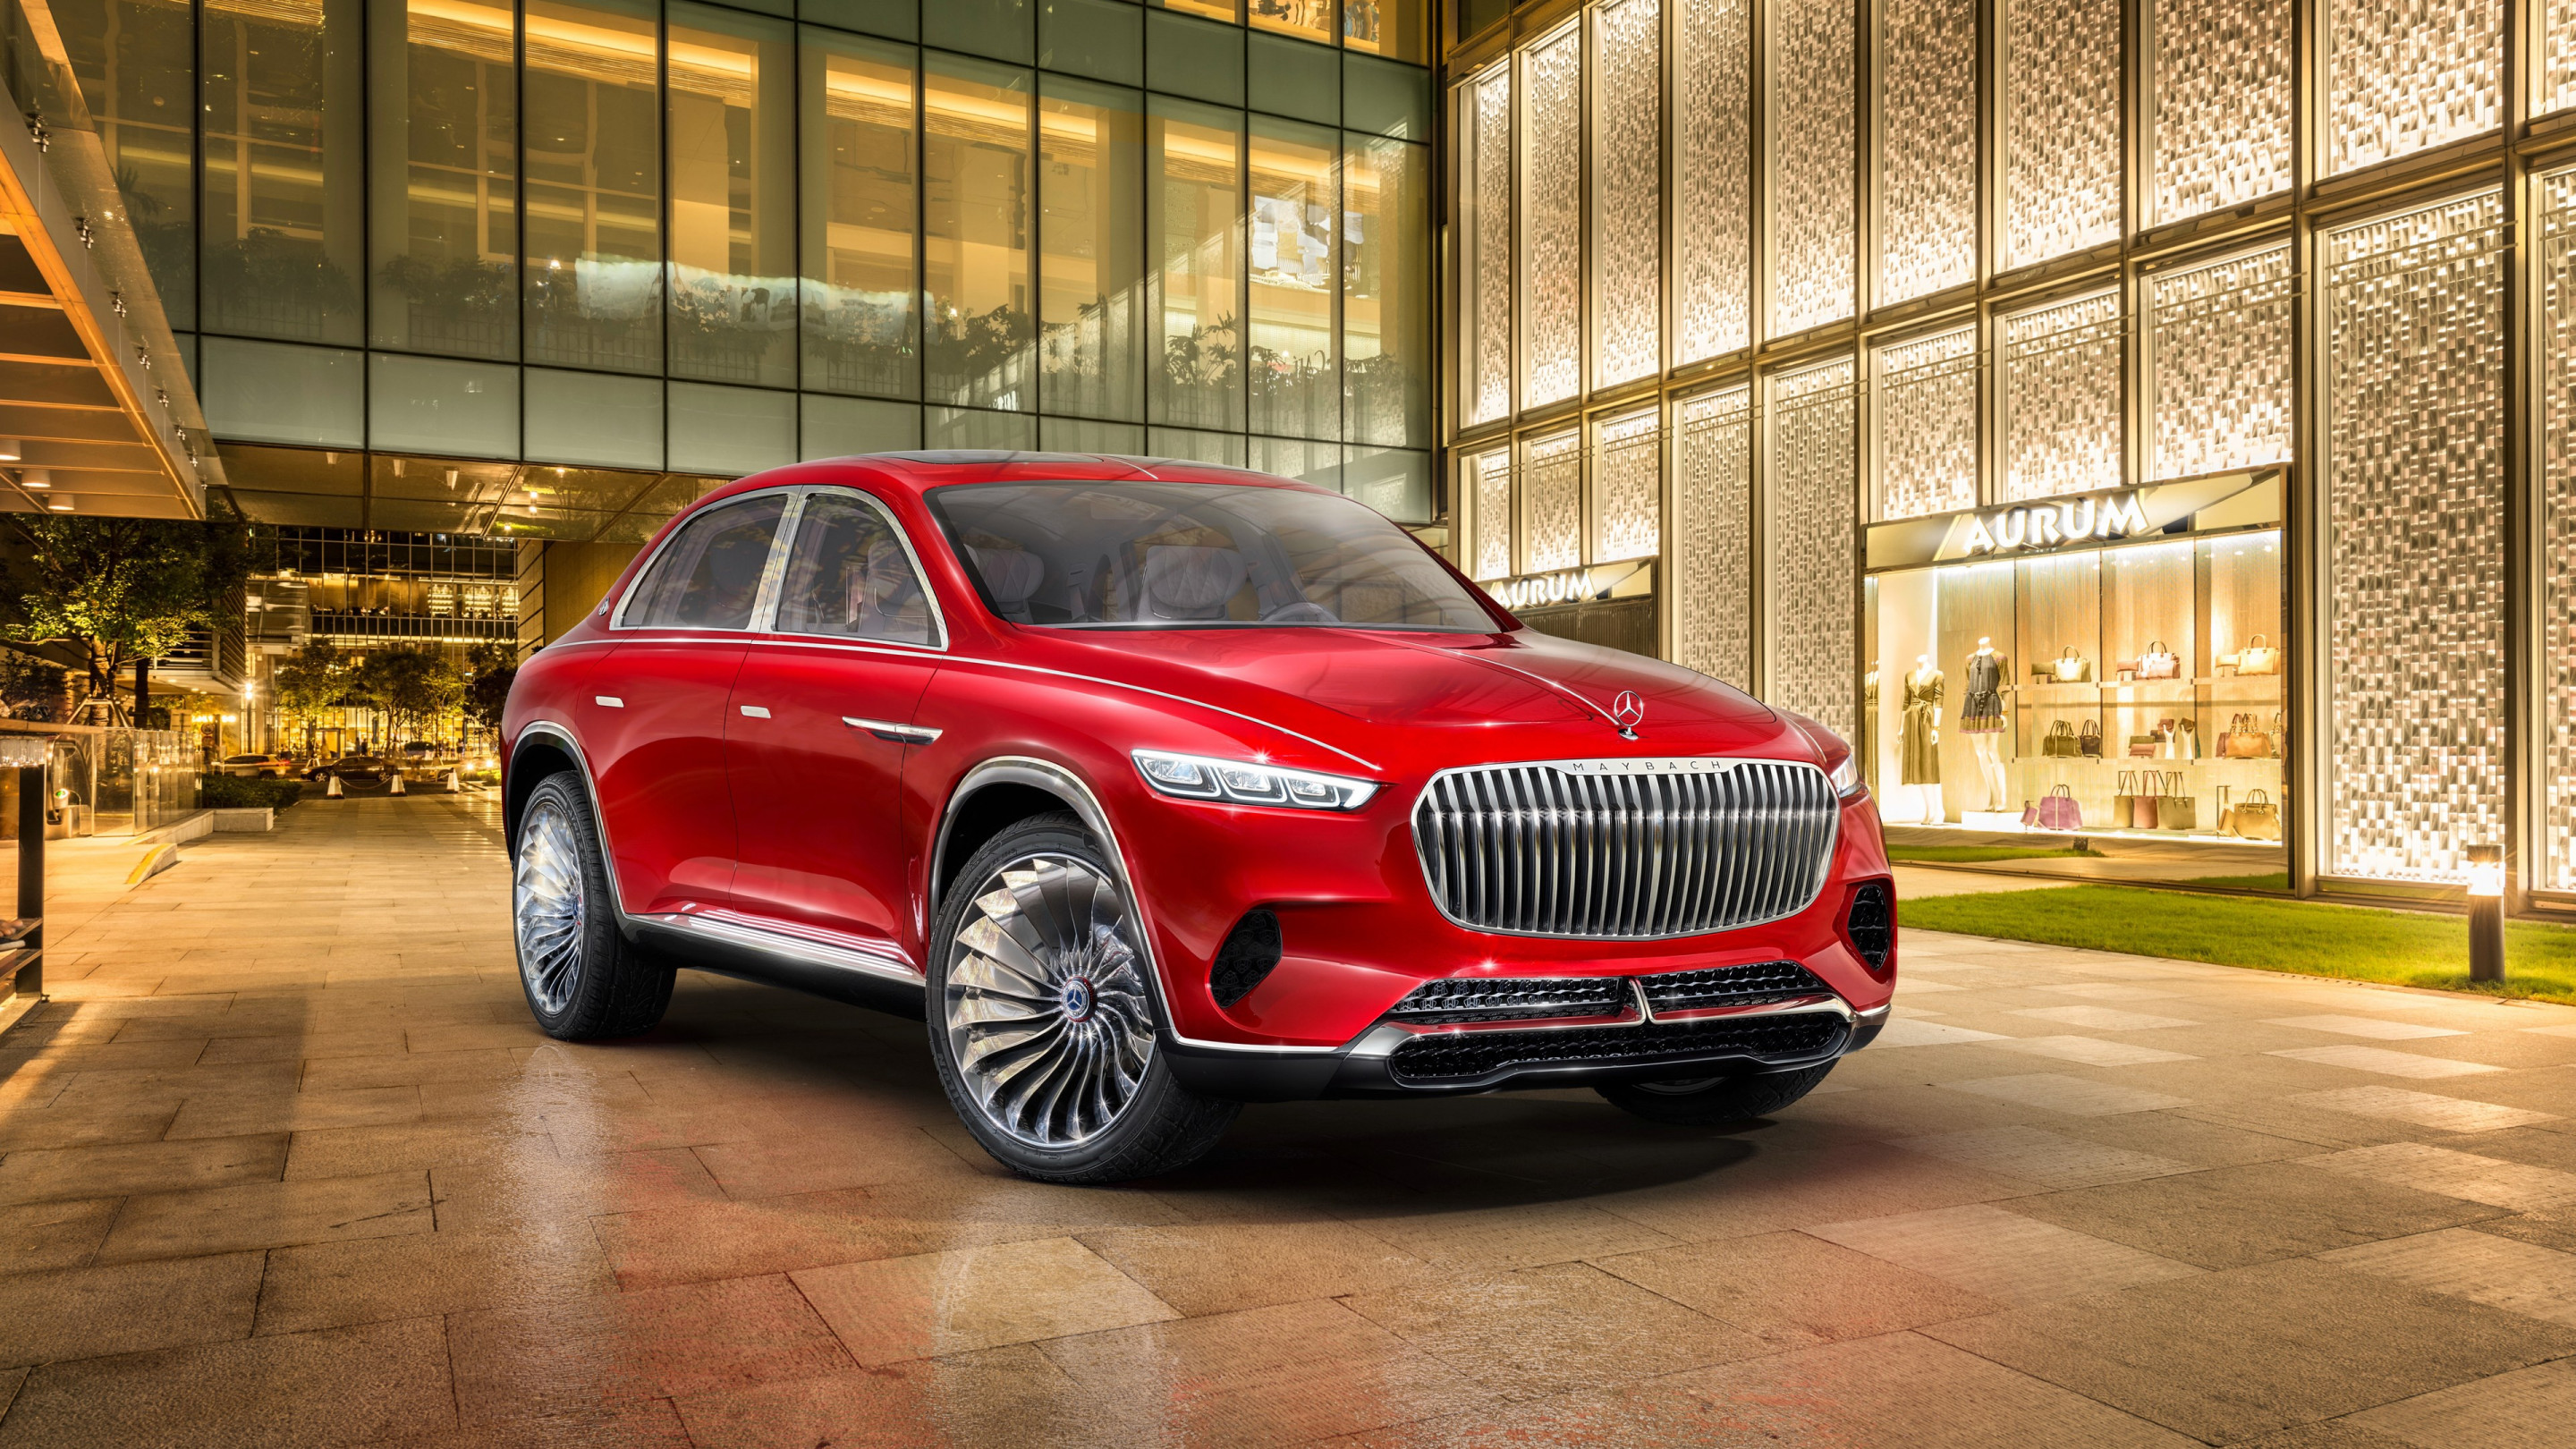 The Vision Mercedes Maybach Ultimate Luxury wallpaper 2880x1620